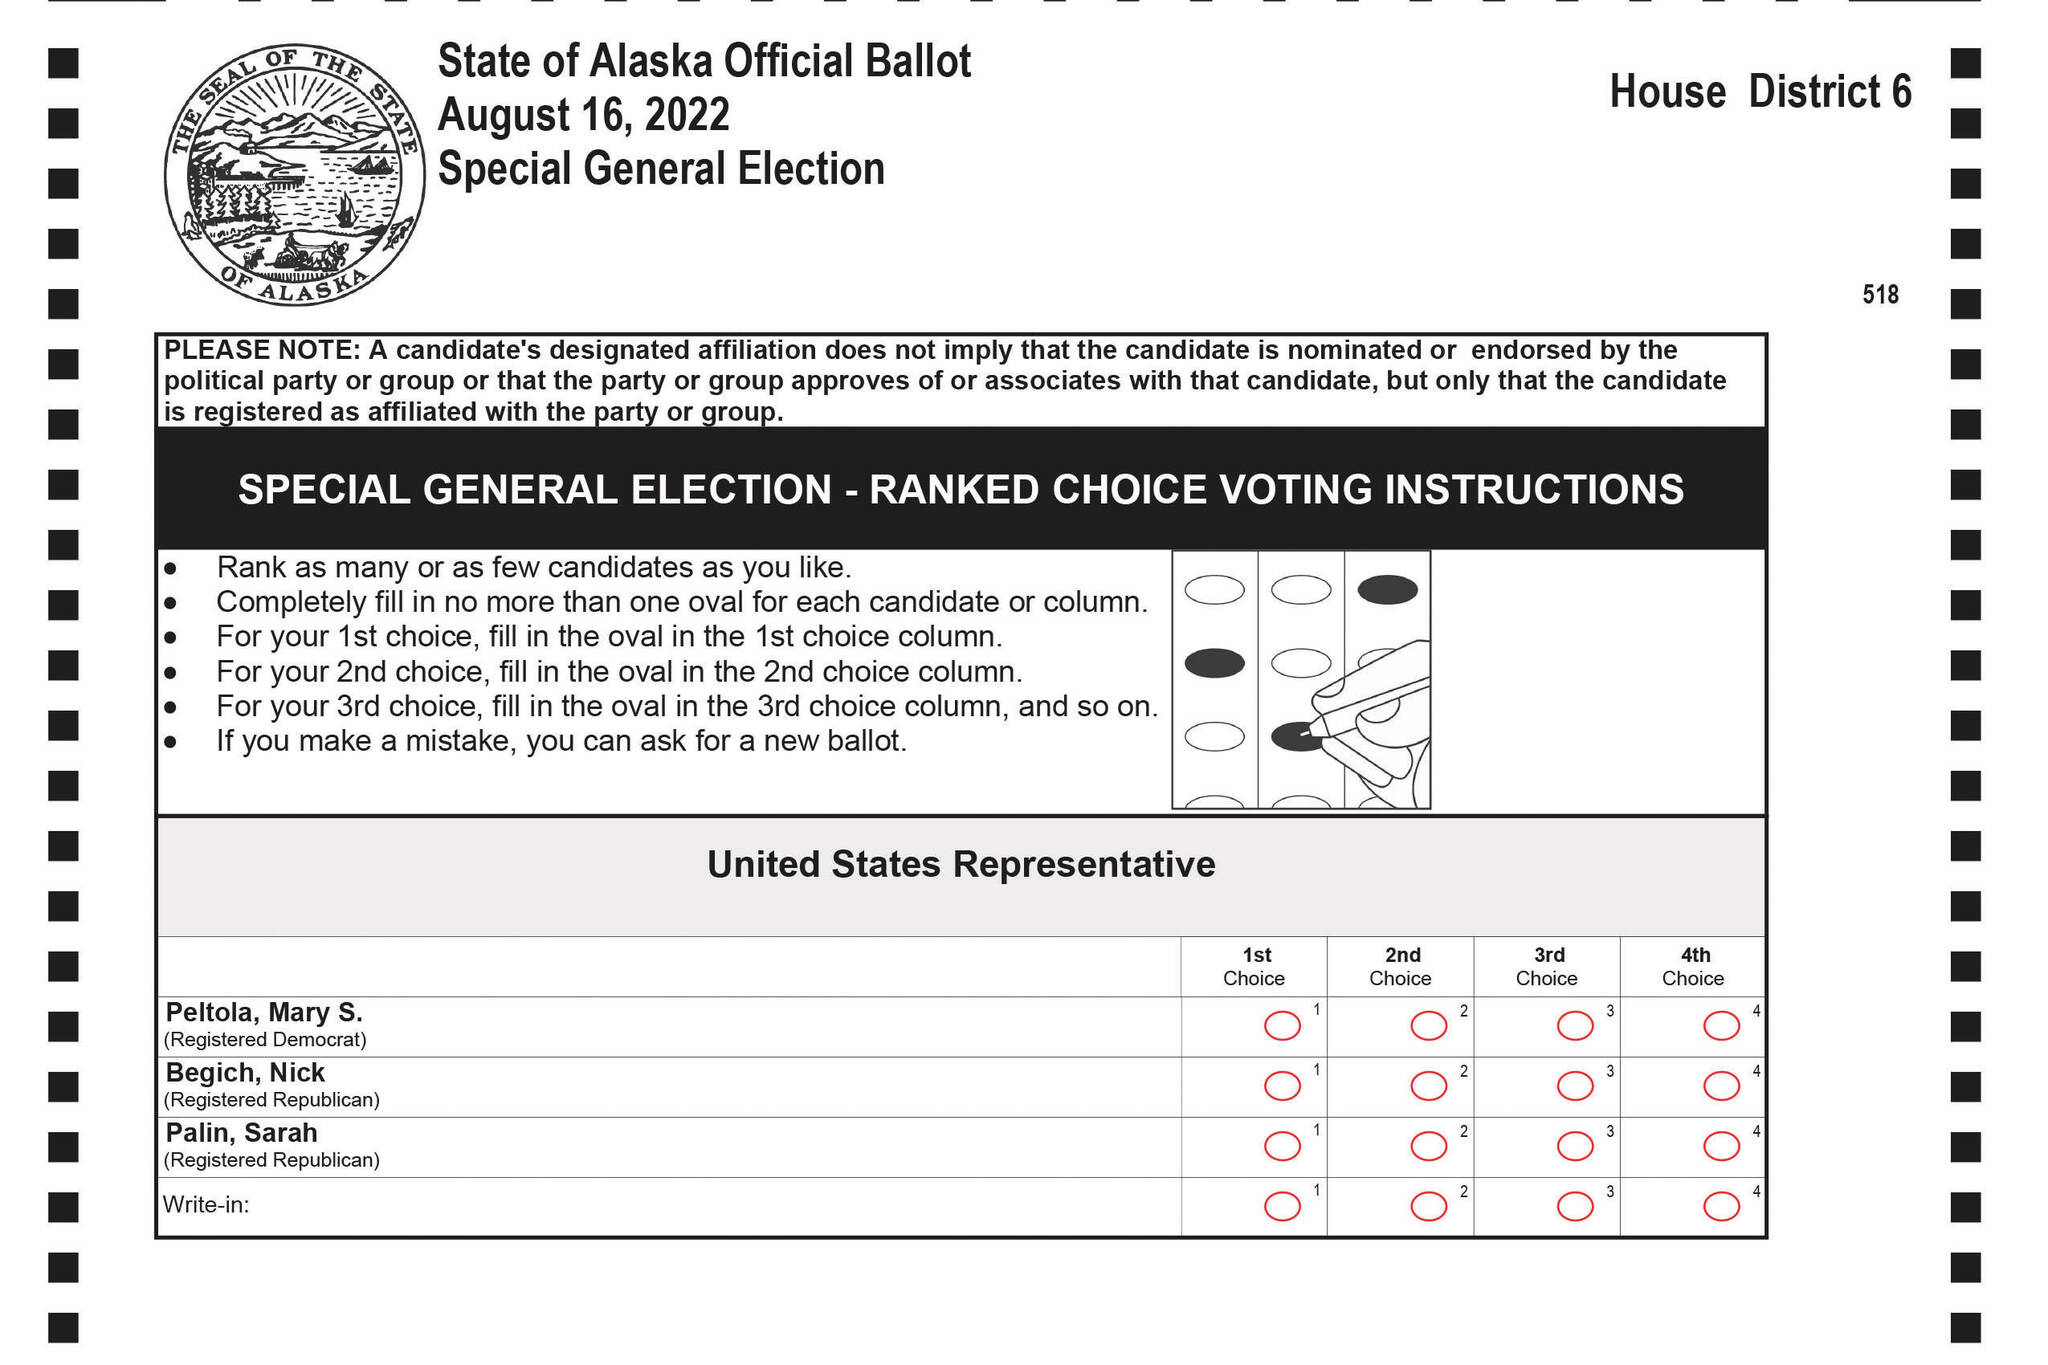 The official ballot for the Aug. 16, 2022, Special General Election features ranked choice voting. (State of Alaska Division of Elections)